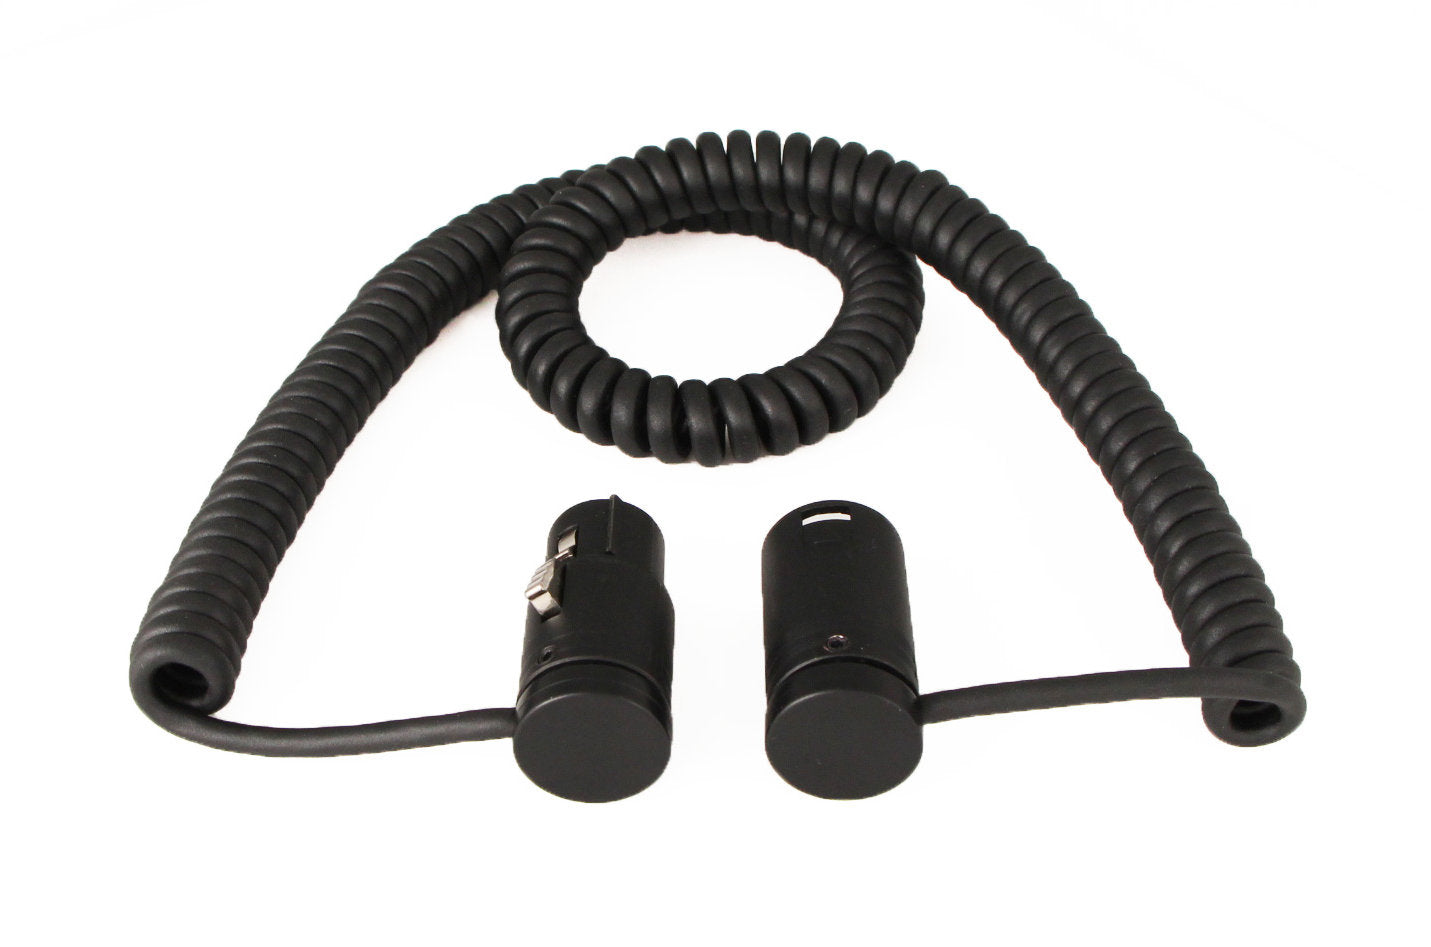 Cable Techniques 18” XLR-3 Premium Coiled “Boom to Mixer” Cable